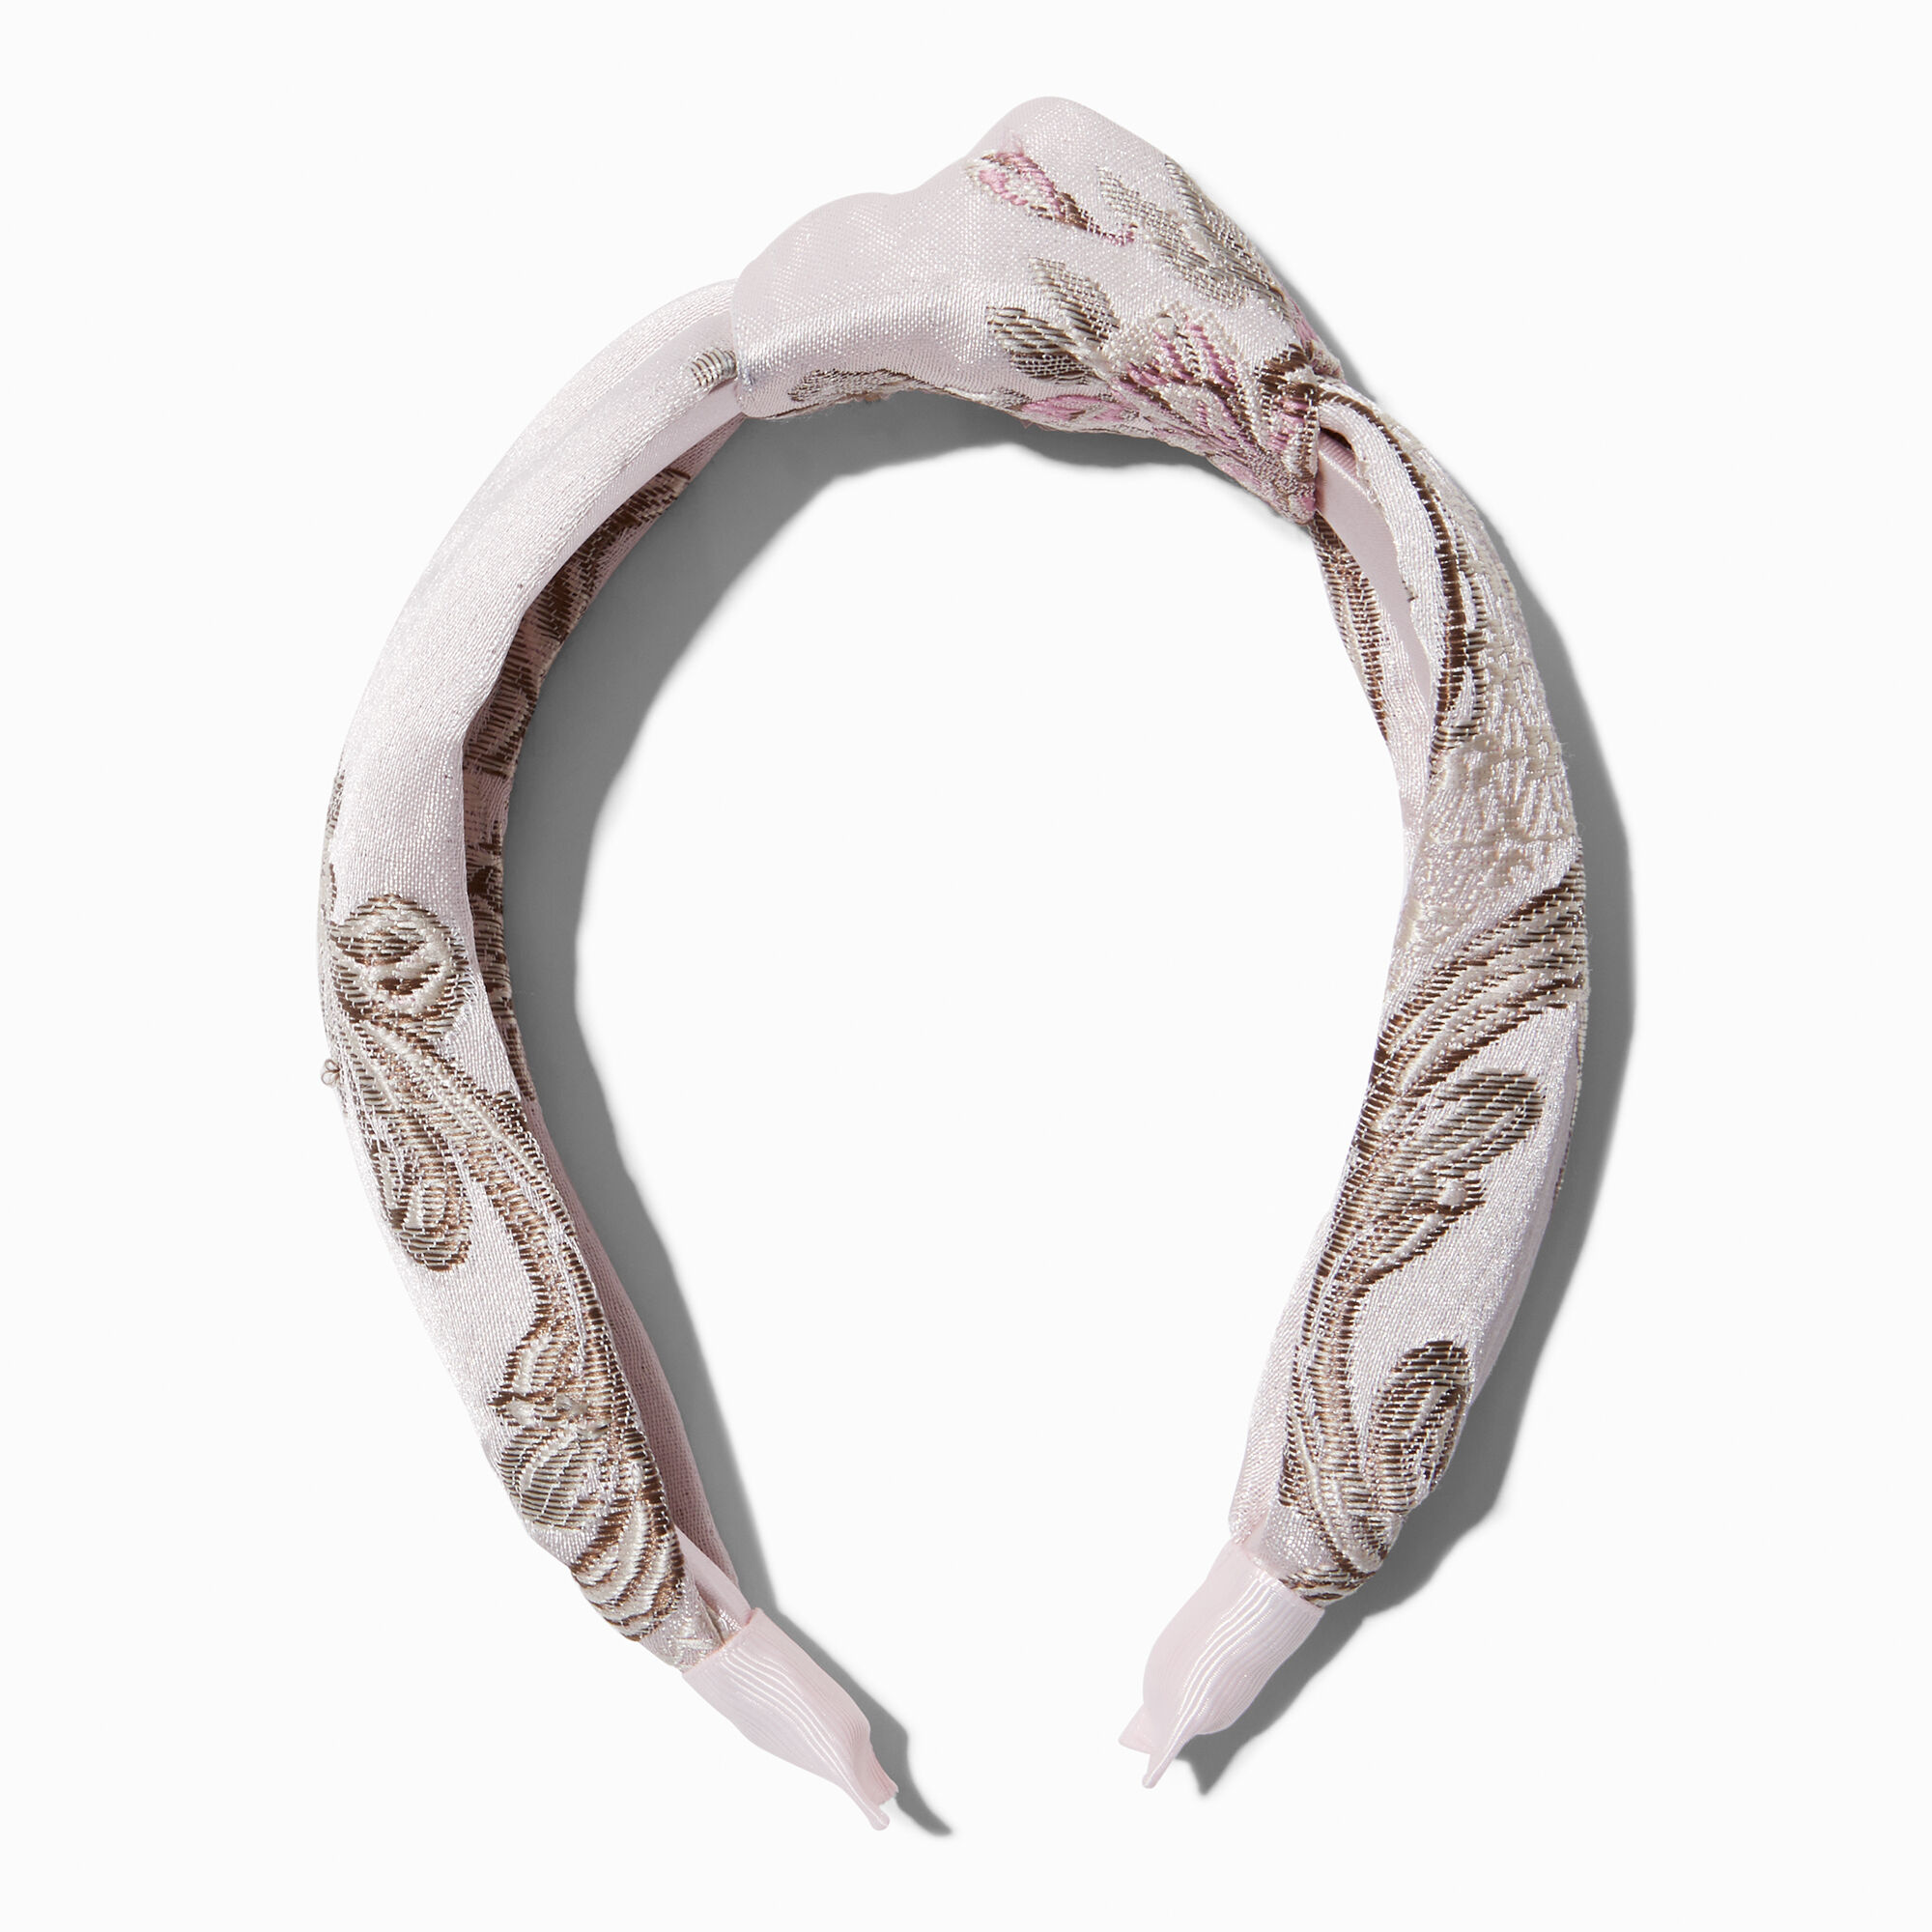 View Claires Blush Floral Brocade Knotted Headband Pink information